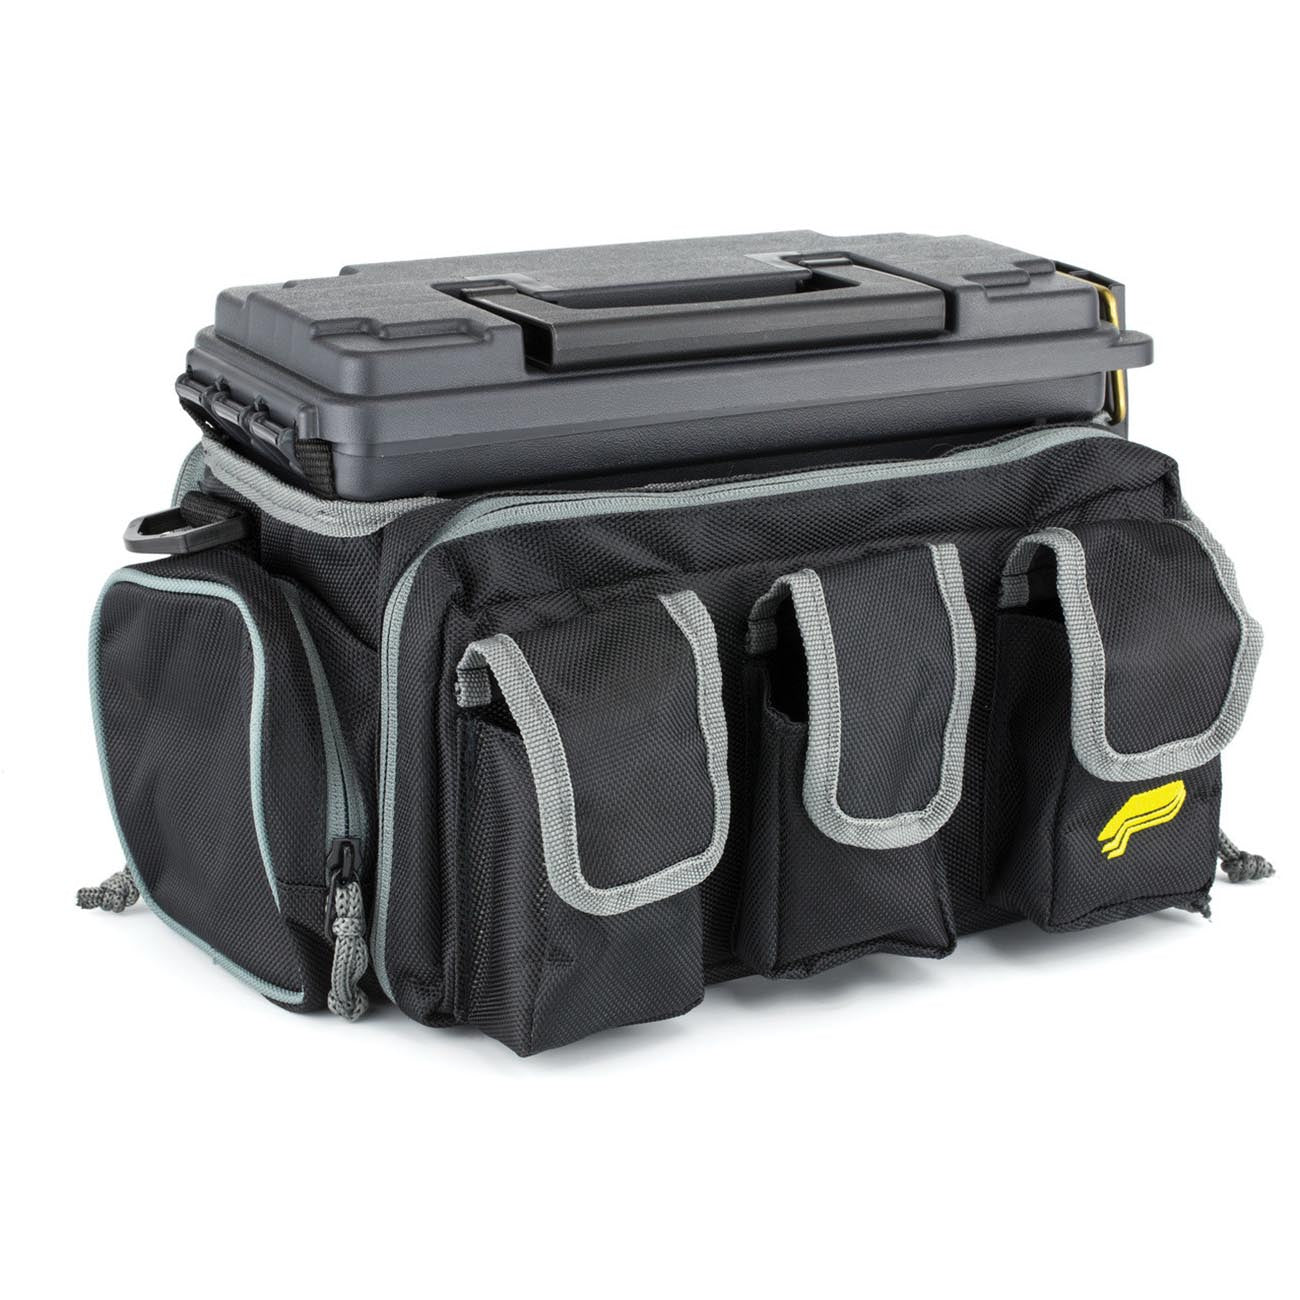 Plano X2 Range Bag With Pistol Pocket And Ammo Can - Small (black/gray)